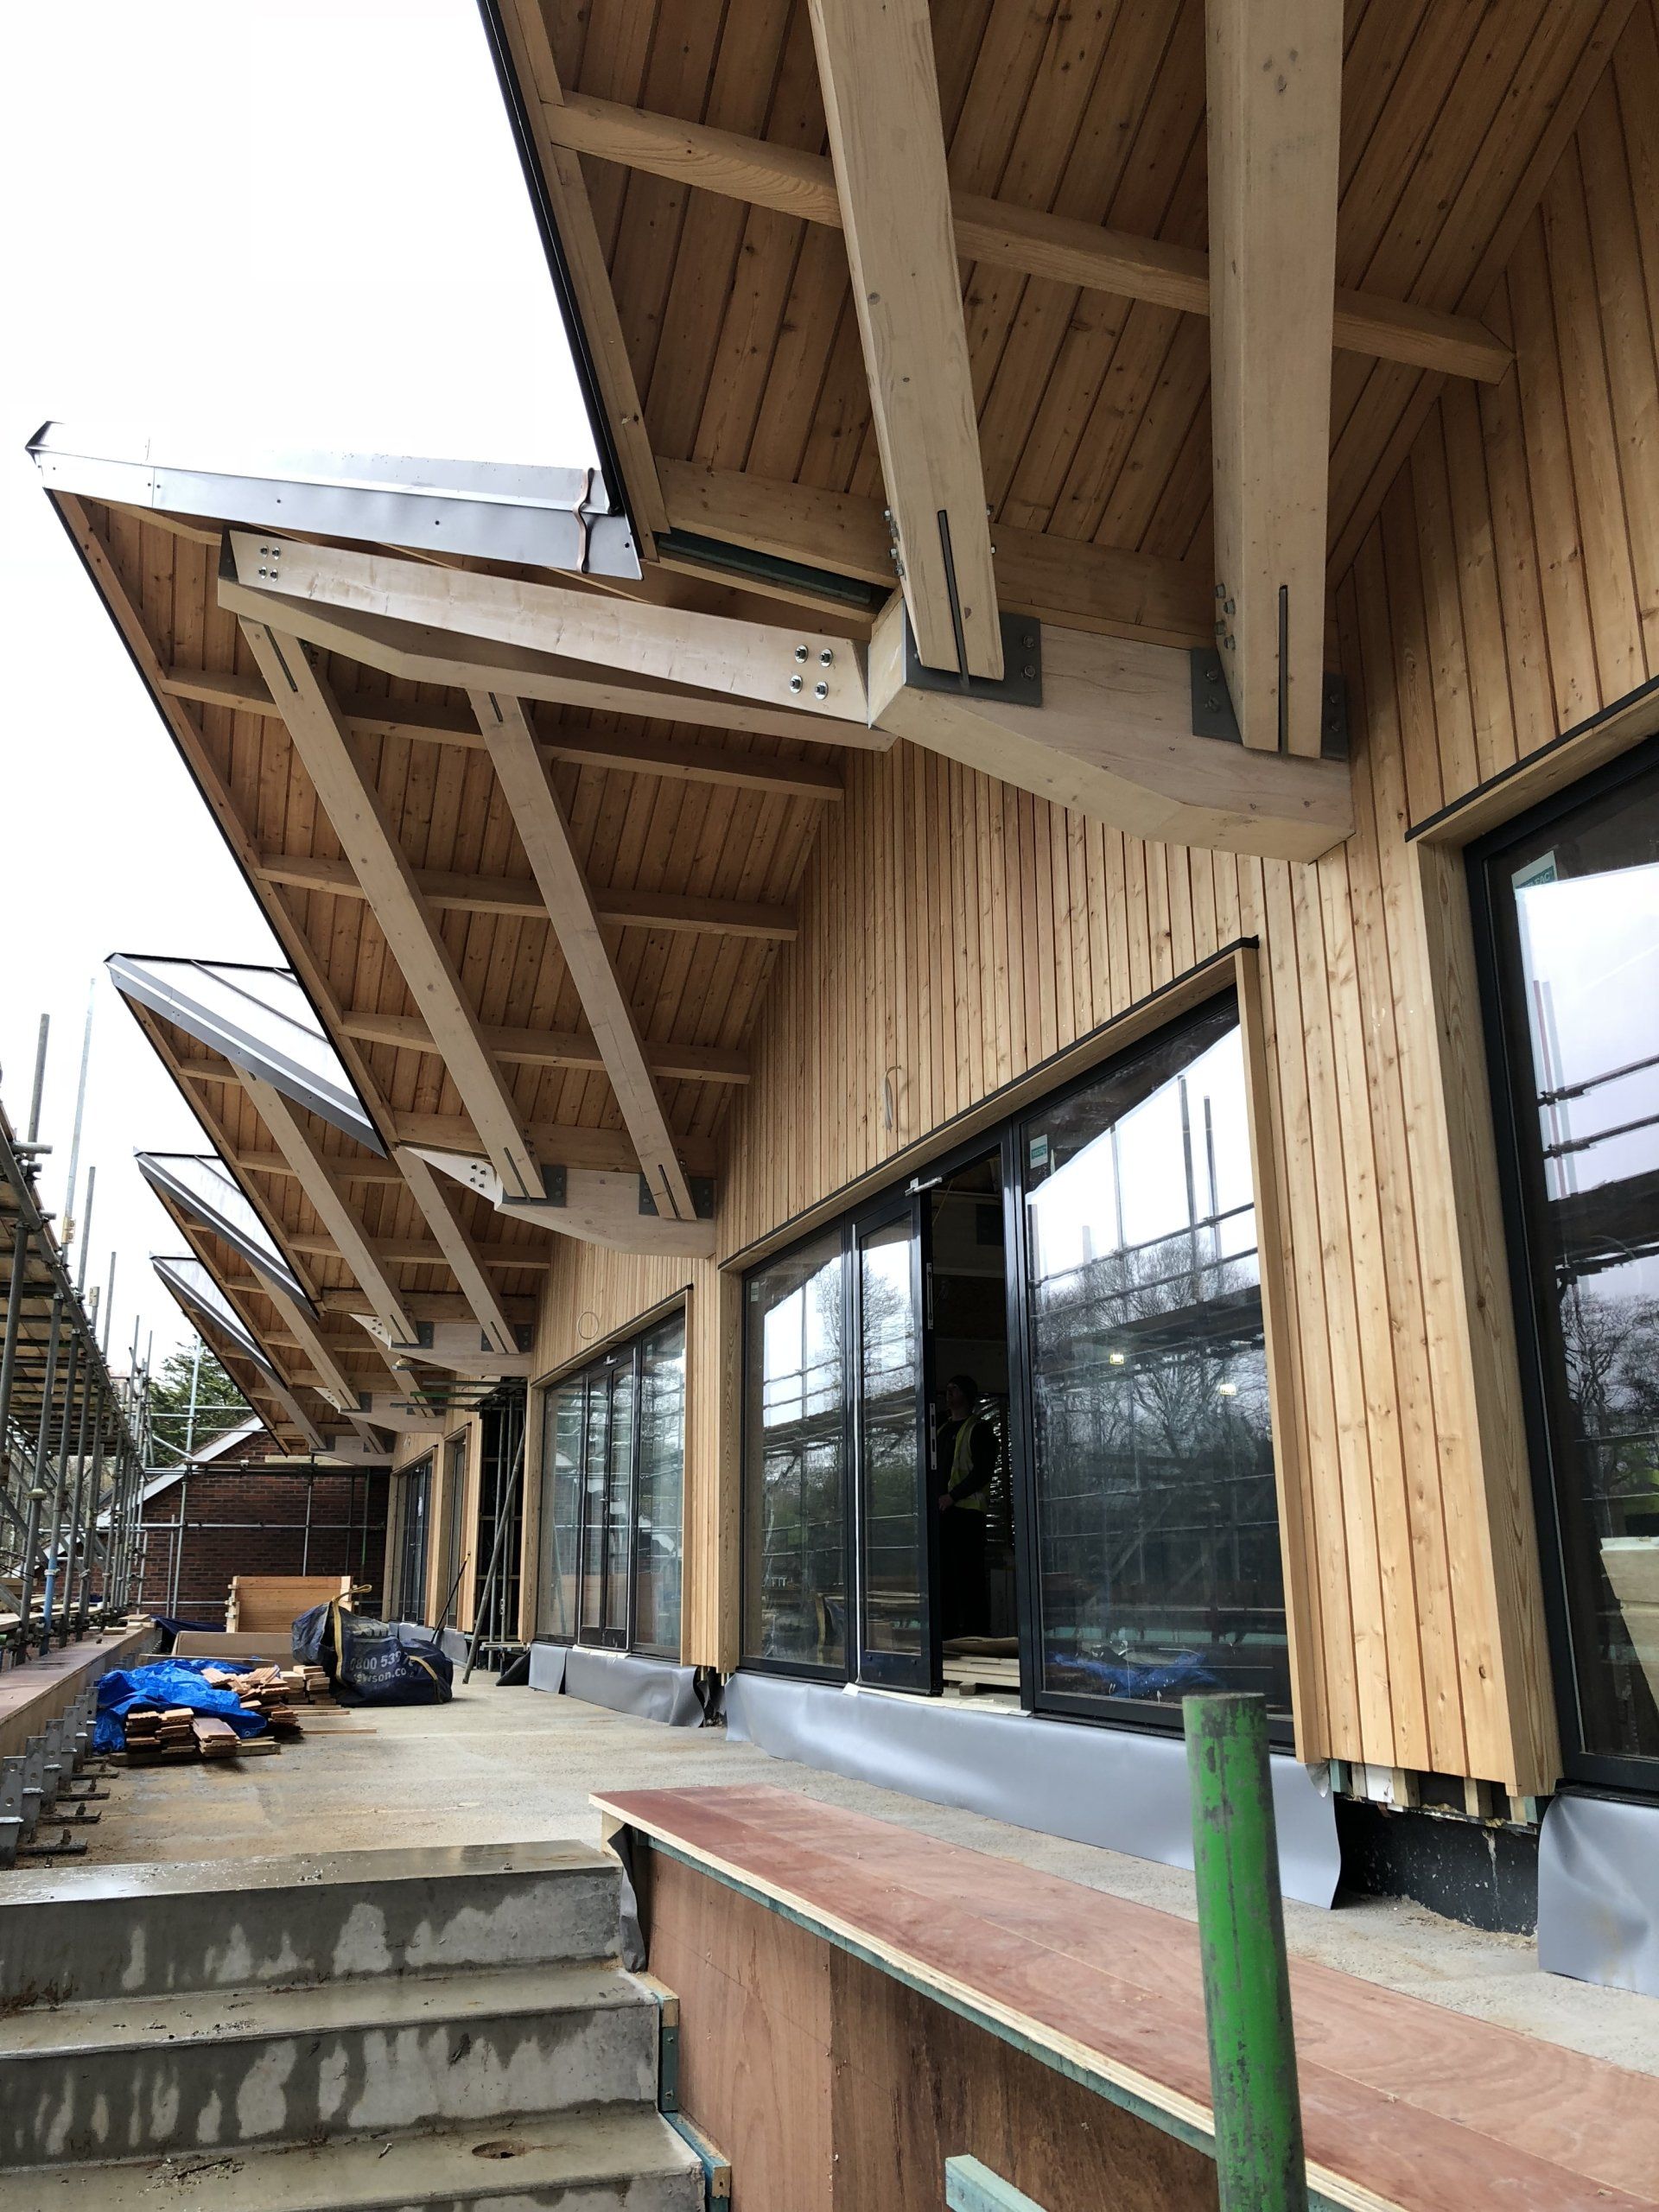 Cedar Cladding in Cranleigh, Surrey. Builder. Building contractor. Construction. Carpentry. Carpentry contractor. Extensions. New builds. Timber frame fabrication and erection. Design and build. Kitchen installations. Horsham. Surrey. Reigate. Redhill. Dorking. Crawley. West Sussex. Cranleigh.